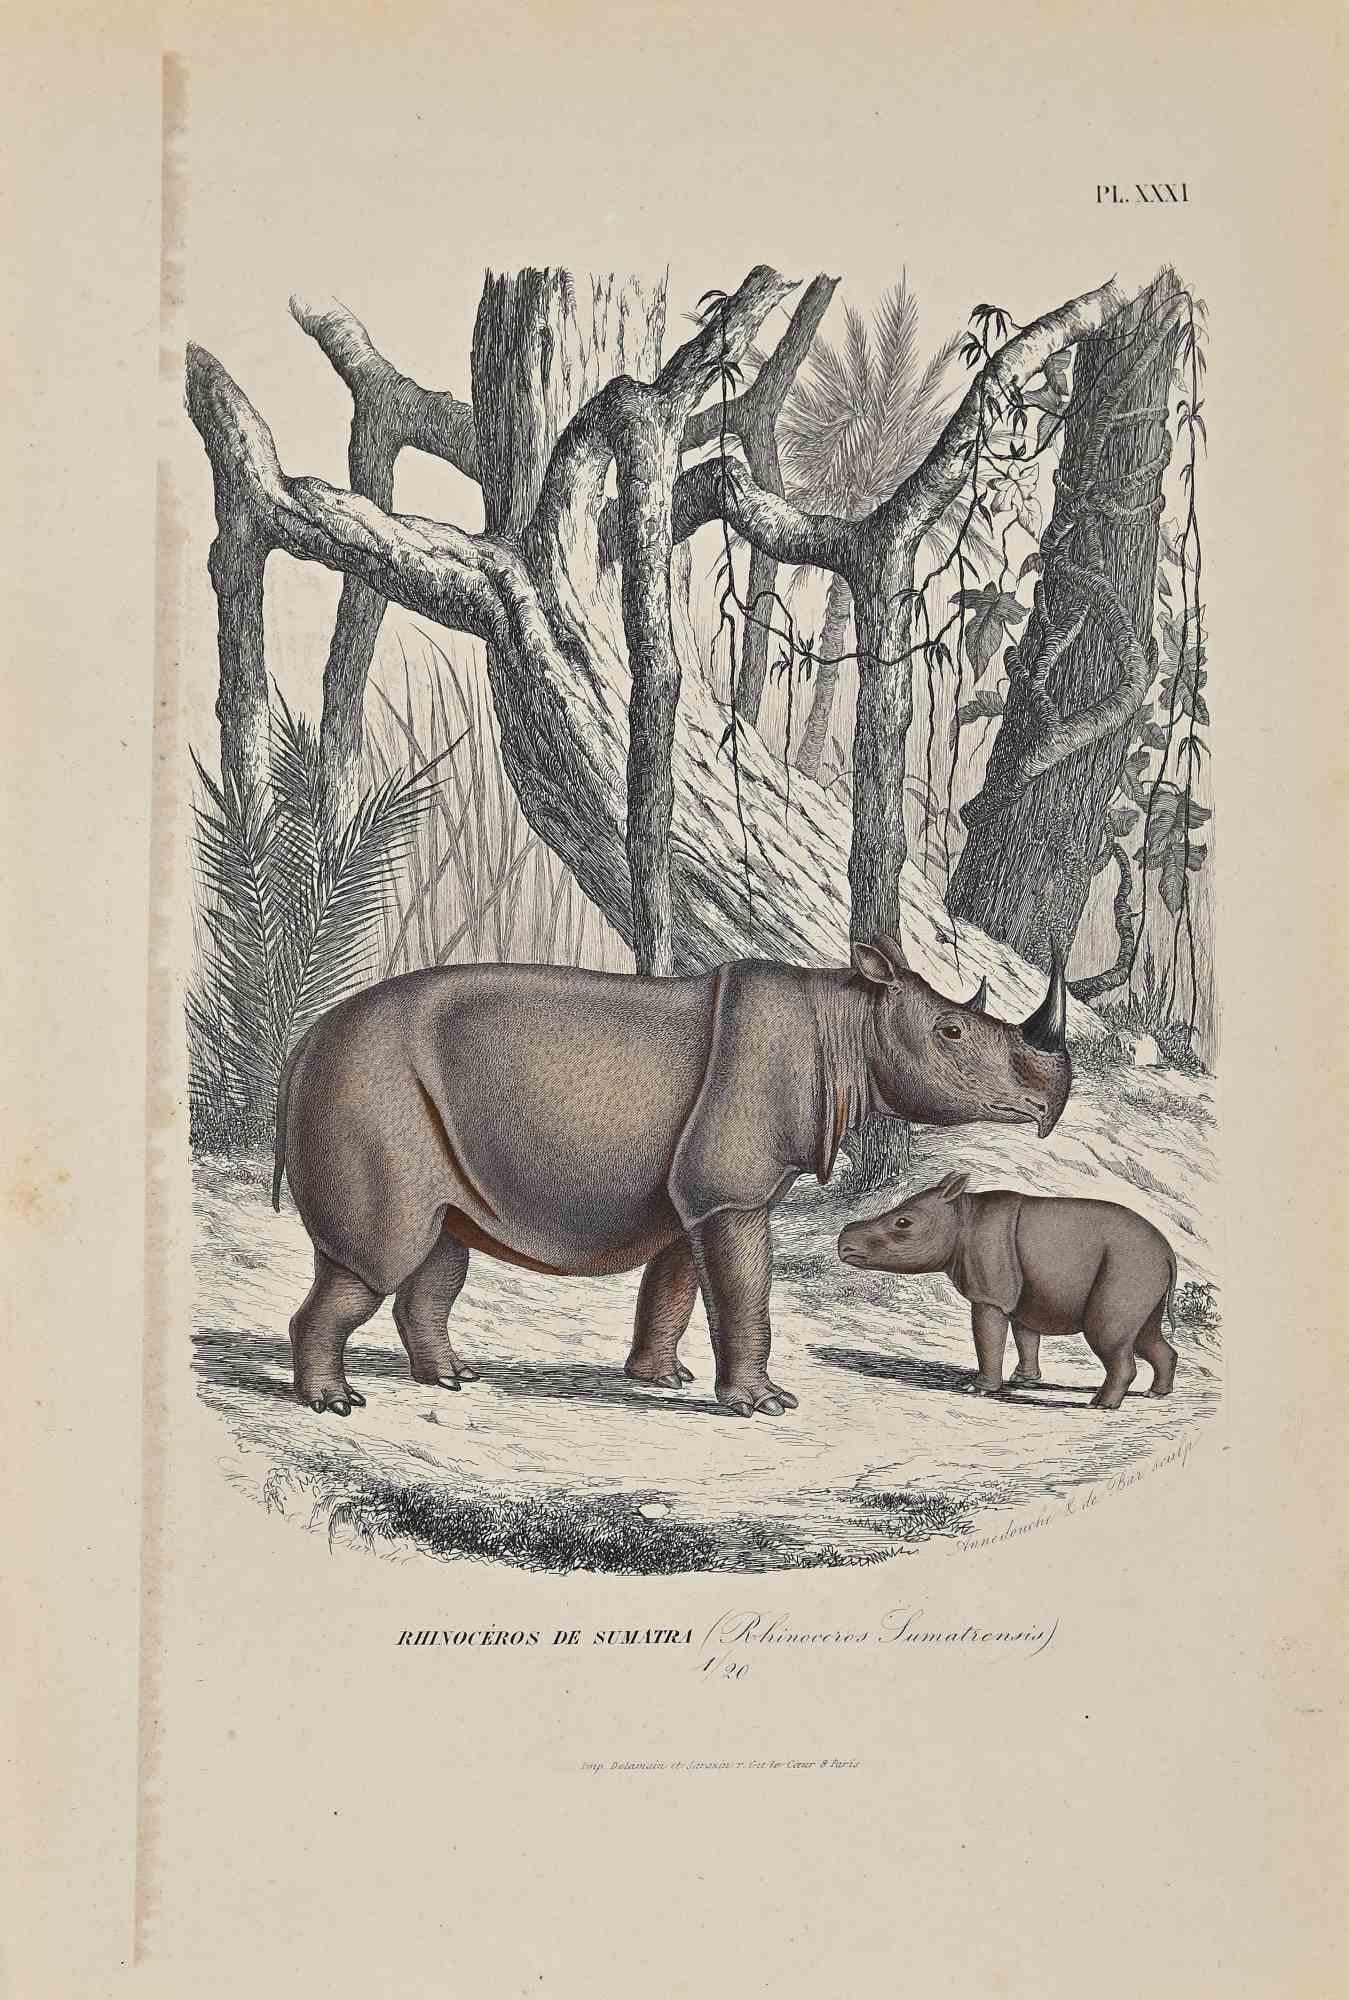 Rhinoceros of Sumatra is an original lithograph on ivory-colored paper, realized by Paul Gervais (1816-1879). The artwork is from The Series of "Les Trois Règnes de la Nature", and was published in 1854.

Good conditions except for some